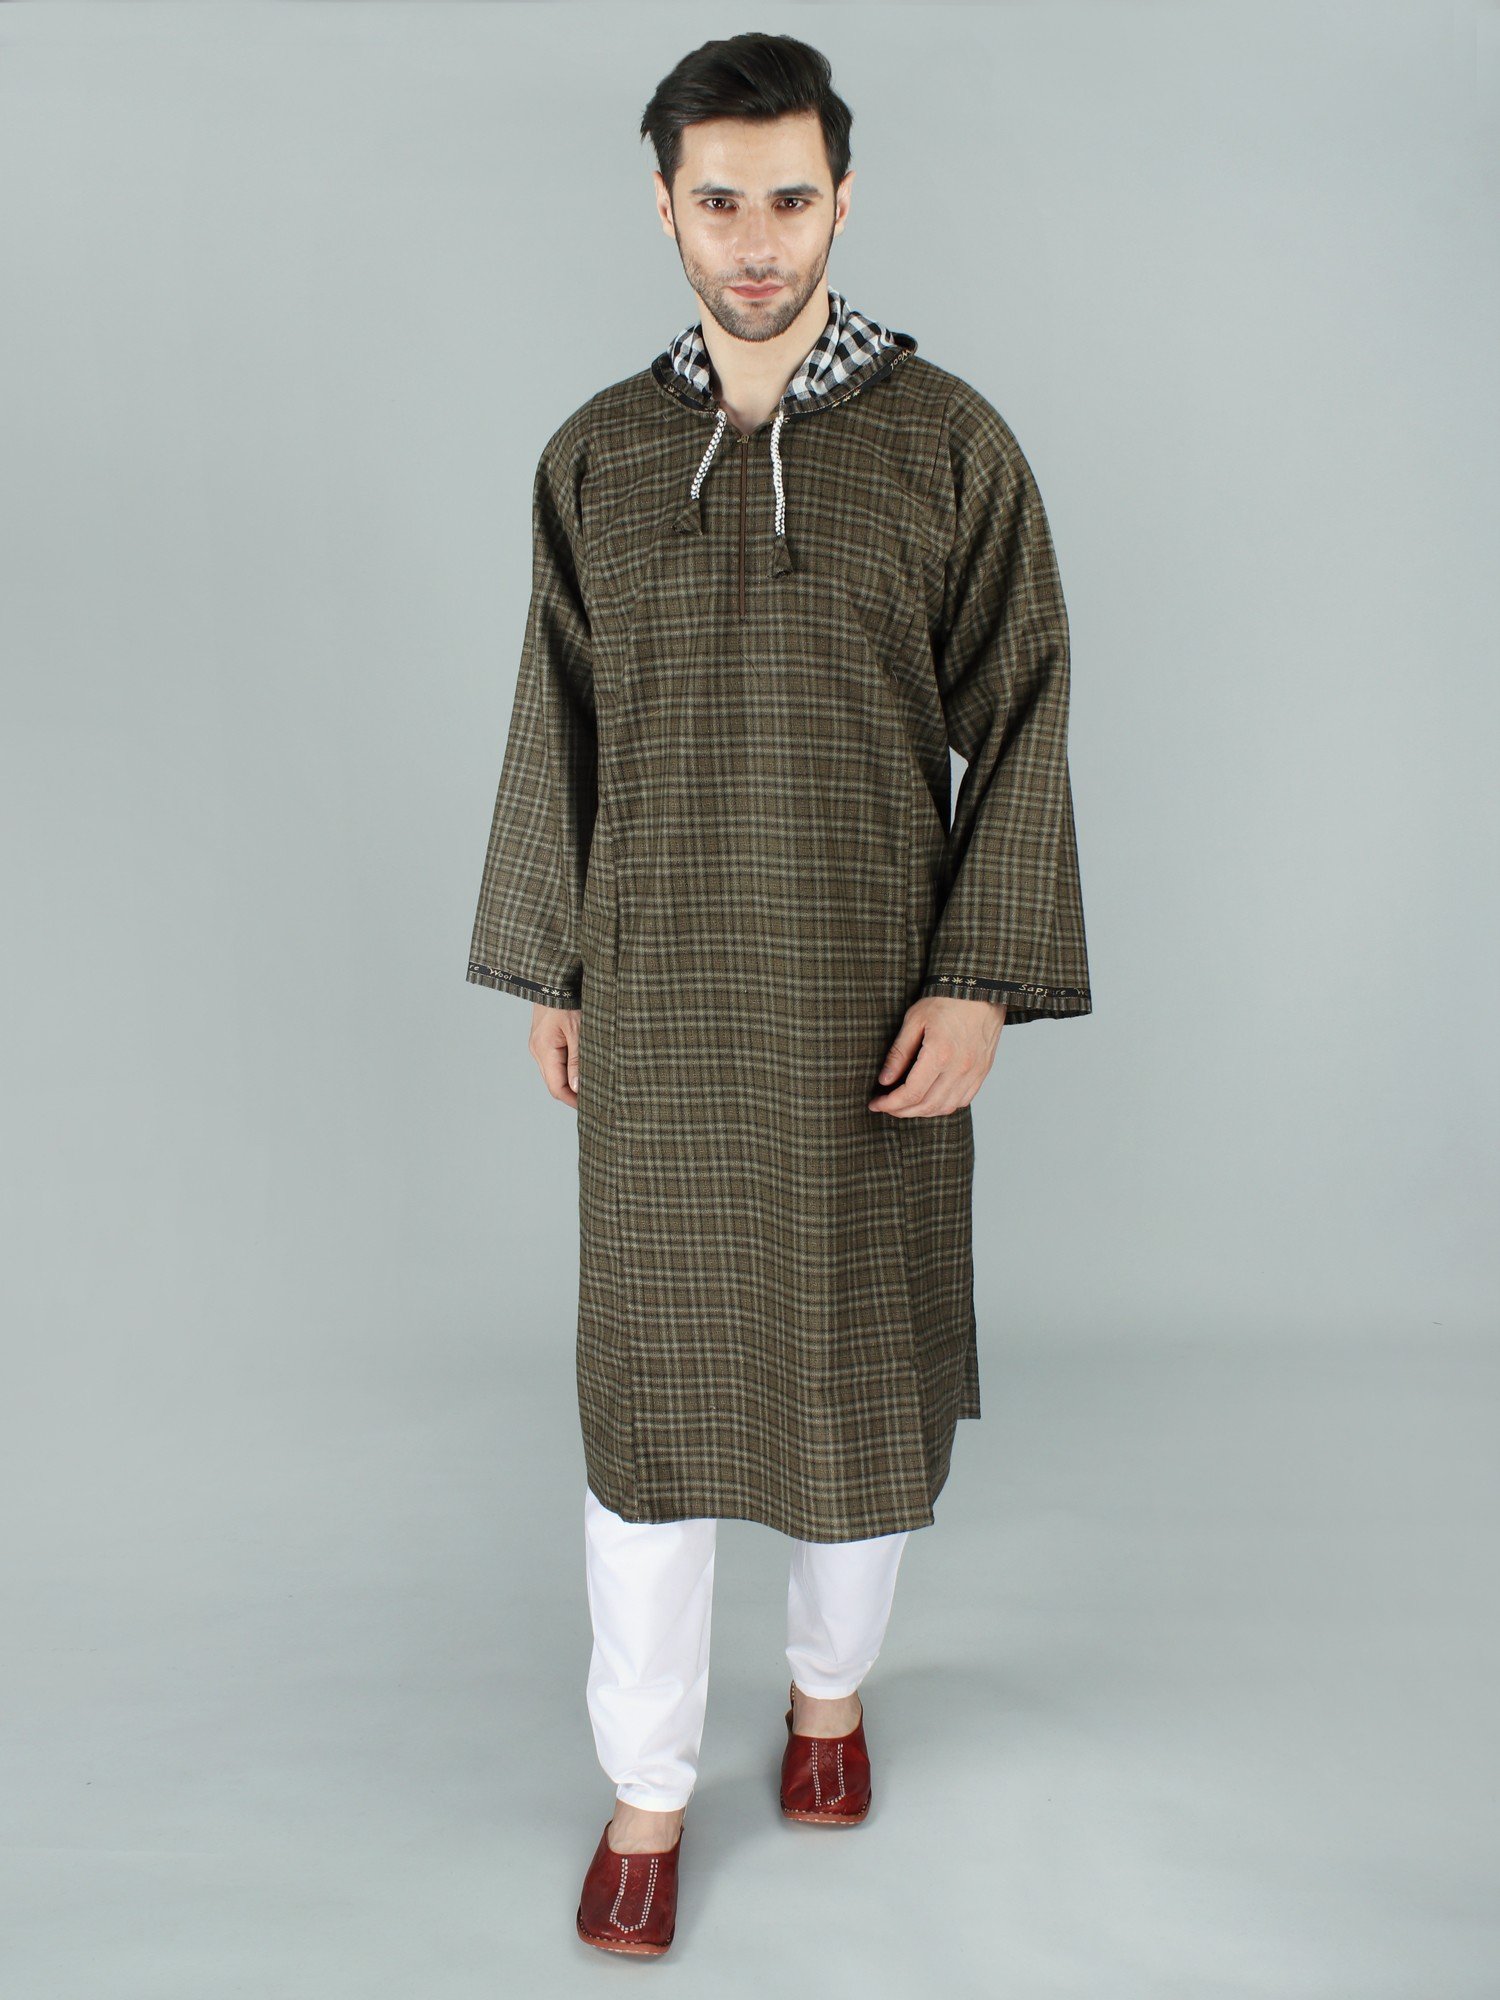 Phiran for Men from Kashmir with Hood | Exotic India Art